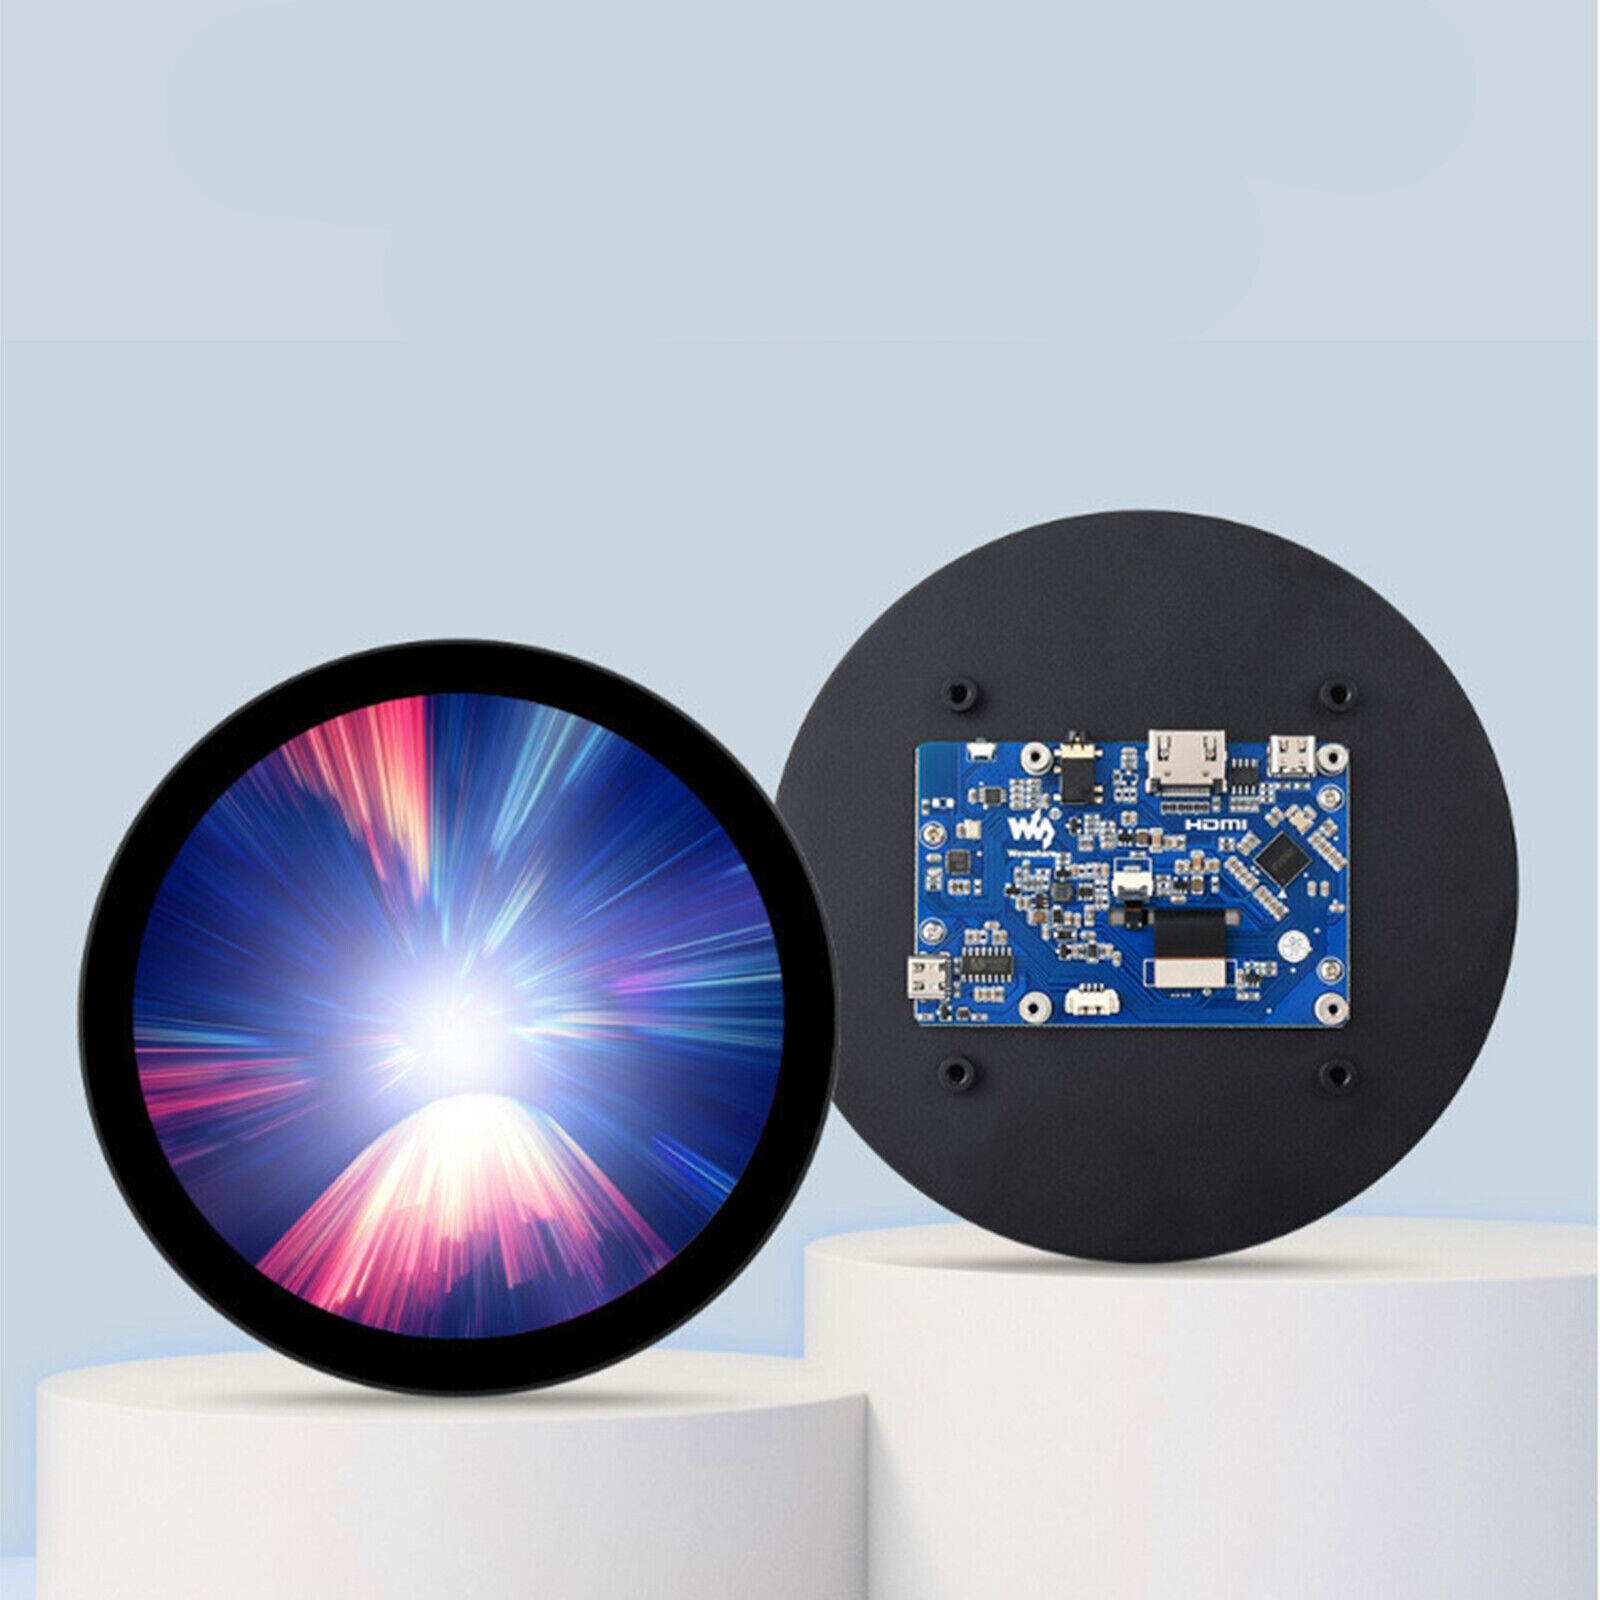 5inch LCD 1080 × 1080 IPS HDMI Round Touch Display USB Compatible Raspberry Pi 